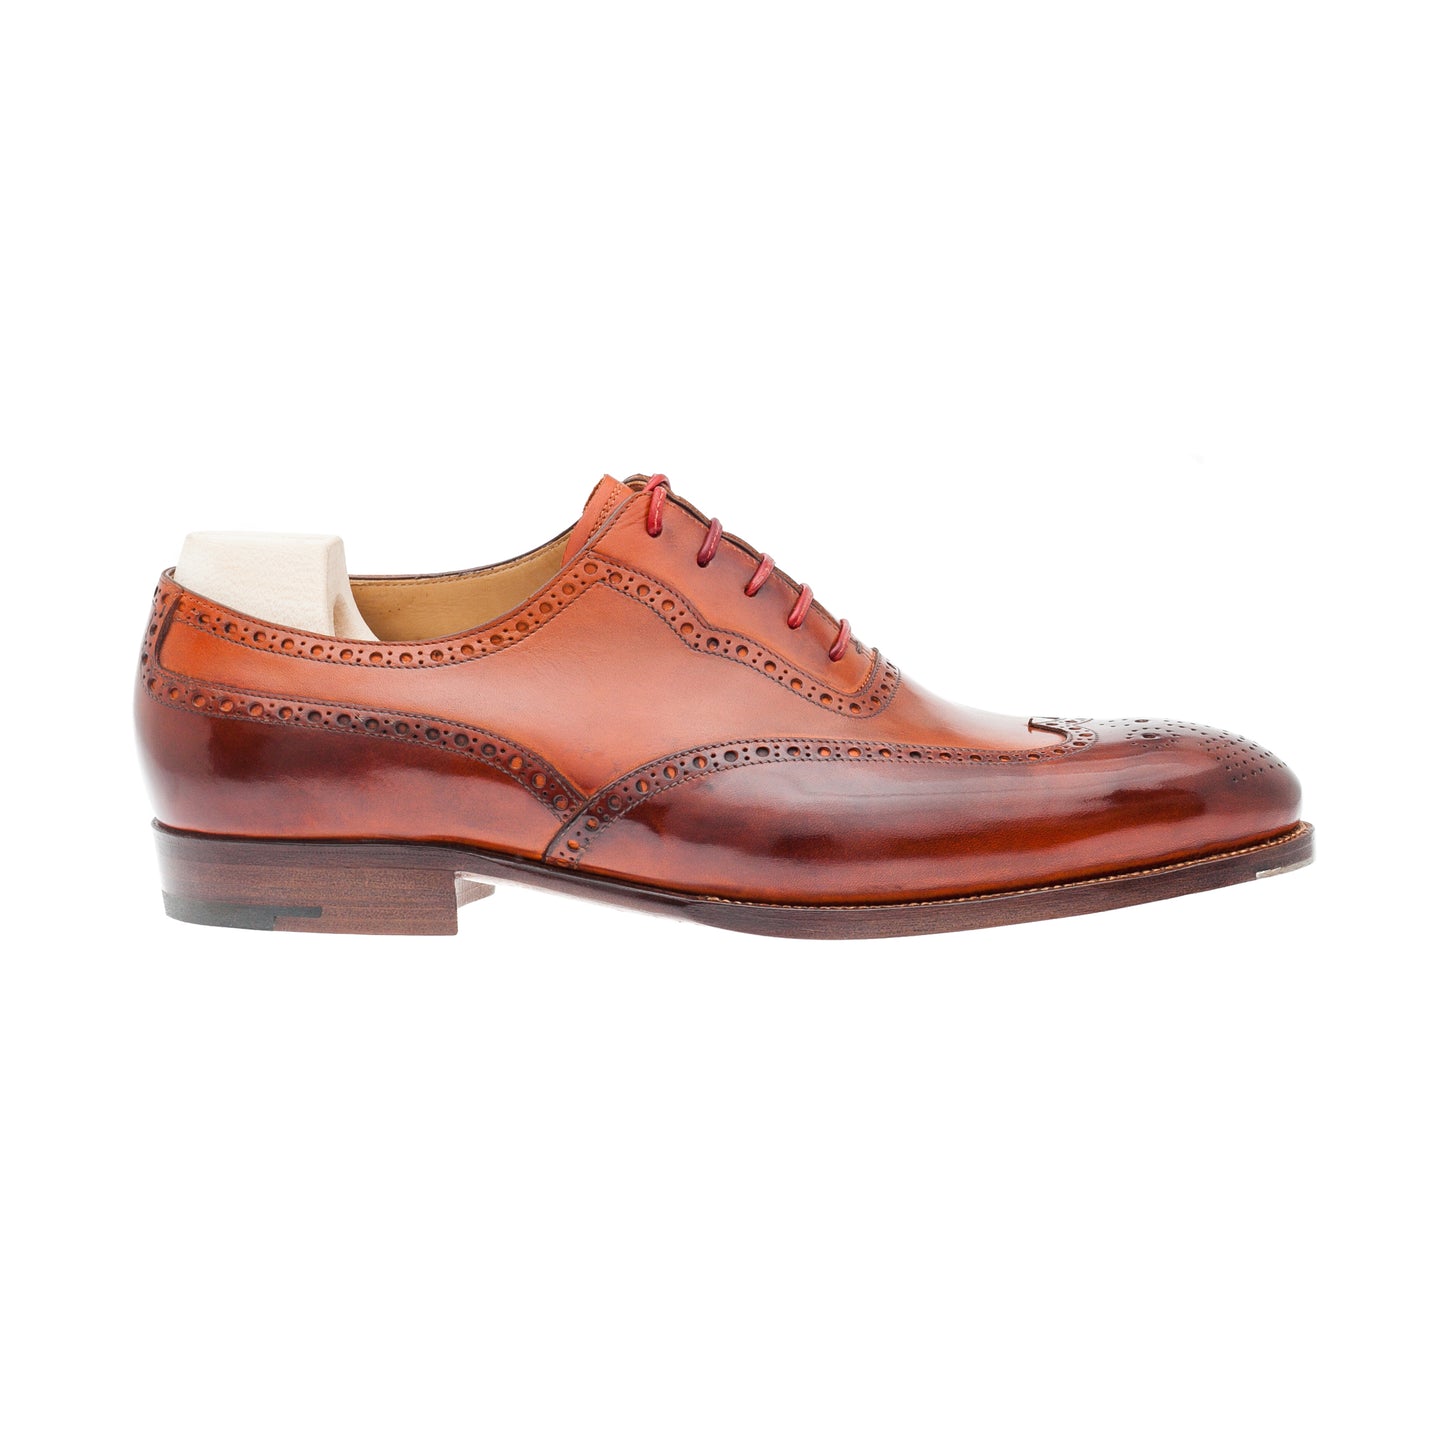 Tow tone long wing full brogue Oxfords